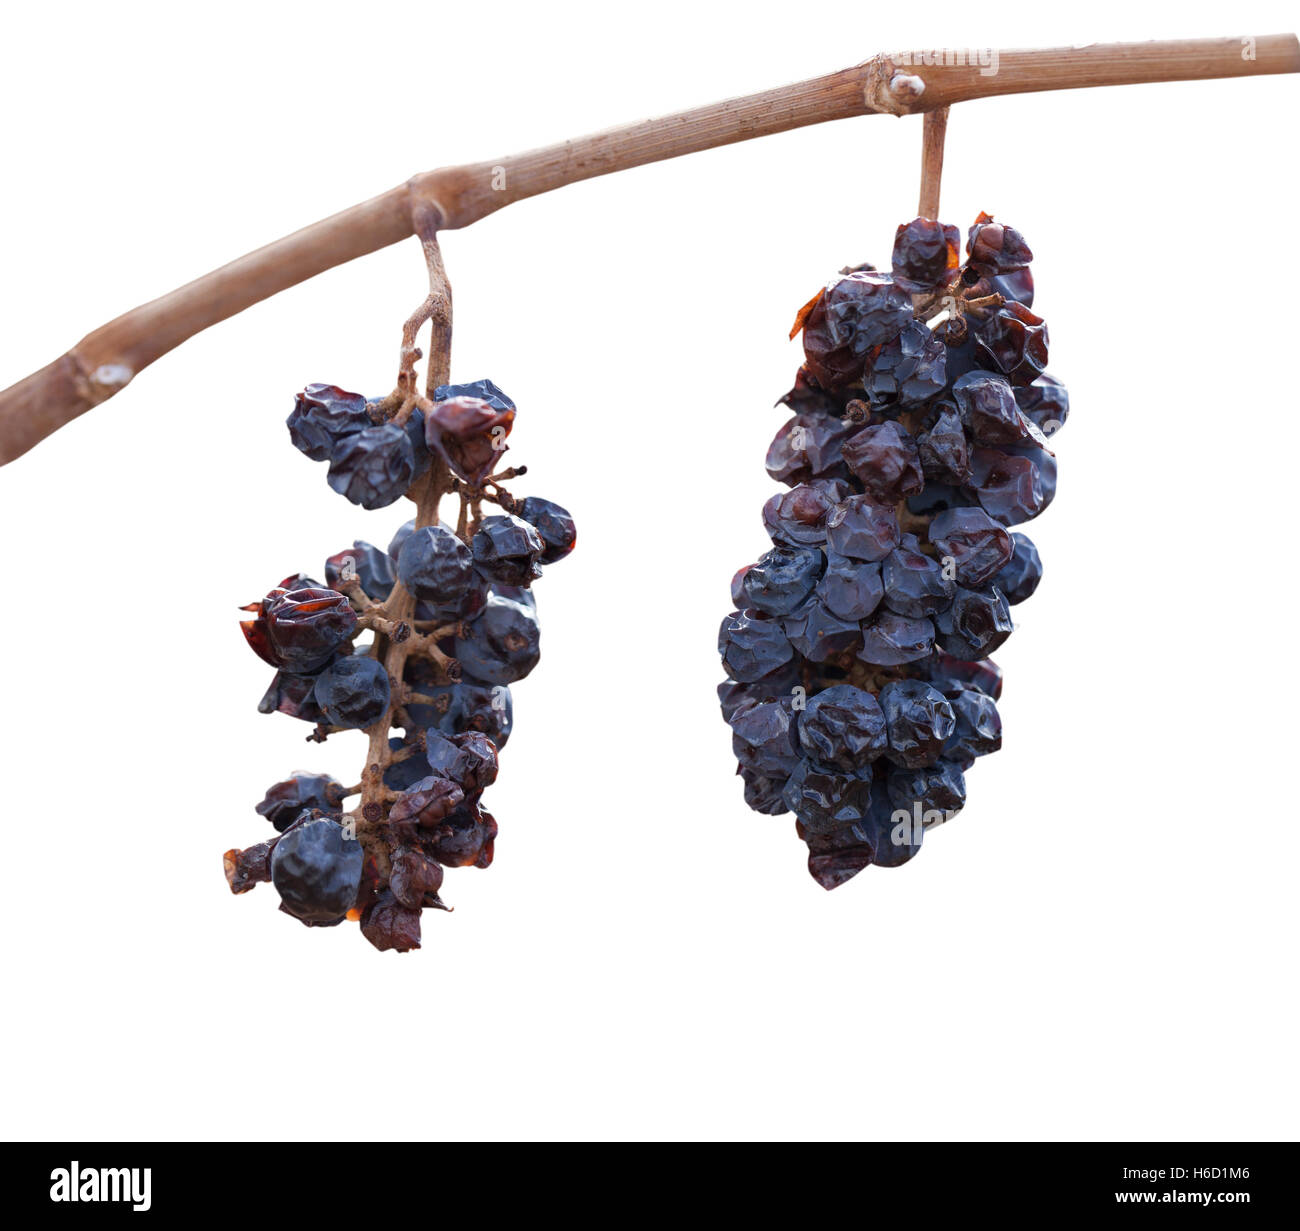 Isolated Withered Grapes Stock Photo